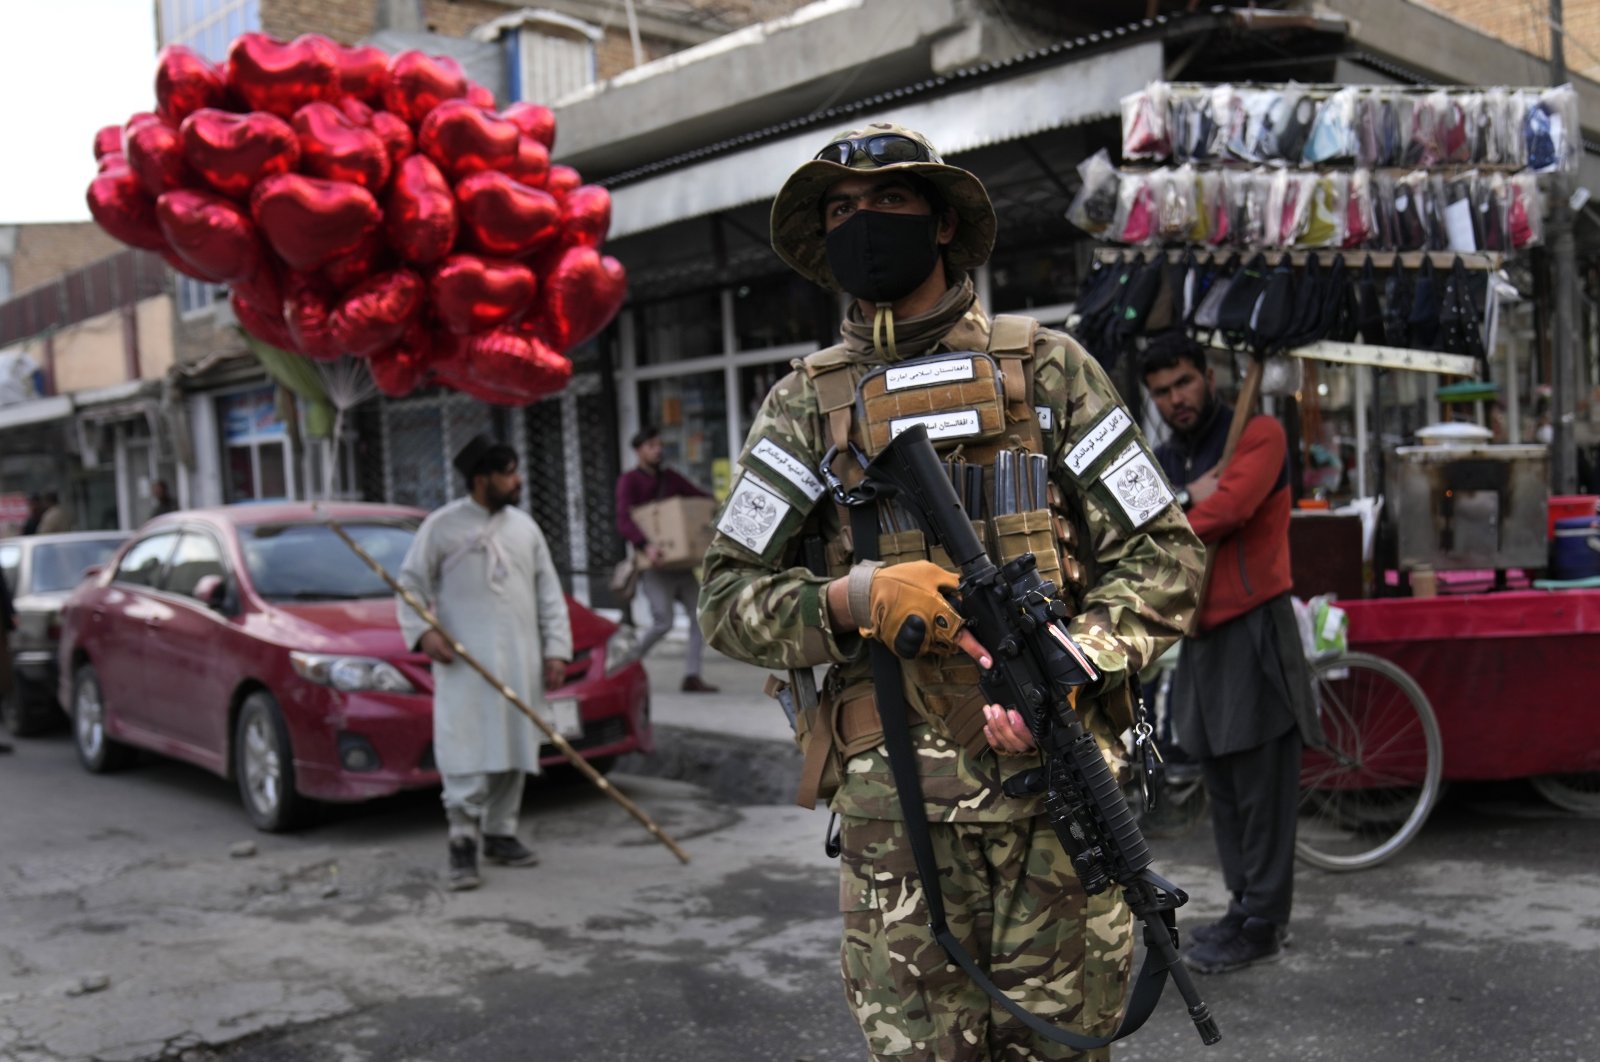 A Taliban fighter passes in front of a street vendor selling red heart-shaped balloons for Valentine&#039;s Day in Kabul, Afghanistan, Feb. 14, 2022. (AP Photo)